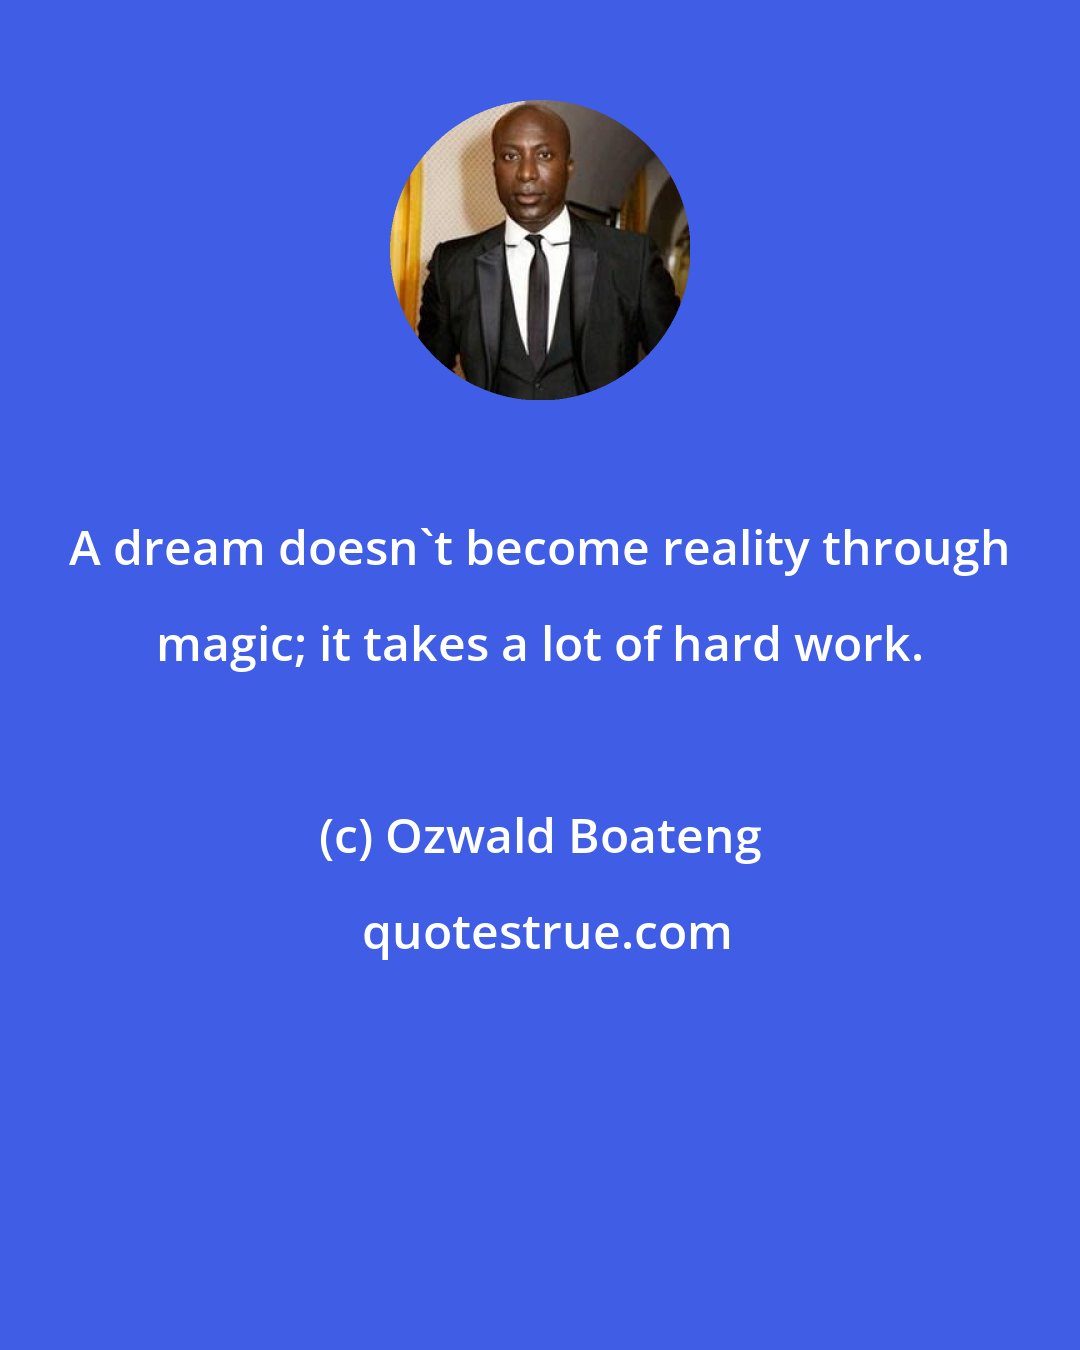 Ozwald Boateng: A dream doesn't become reality through magic; it takes a lot of hard work.